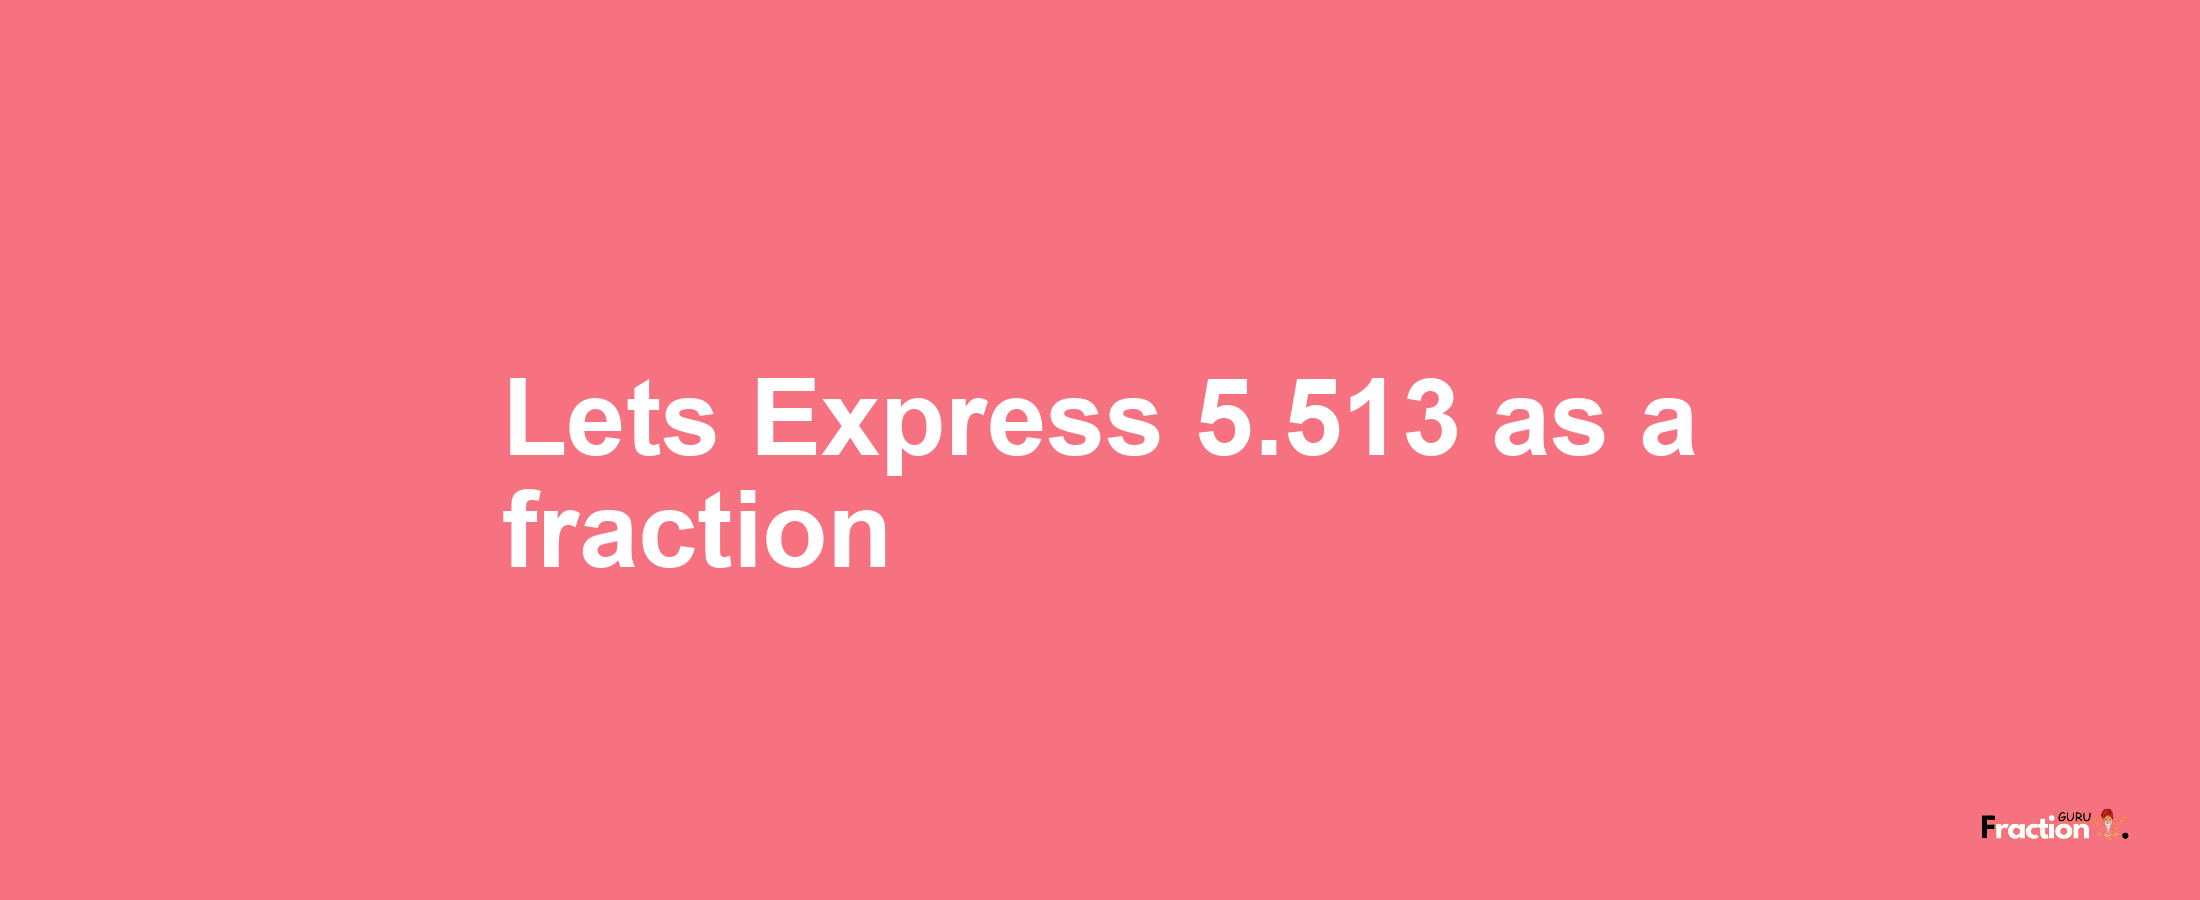 Lets Express 5.513 as afraction